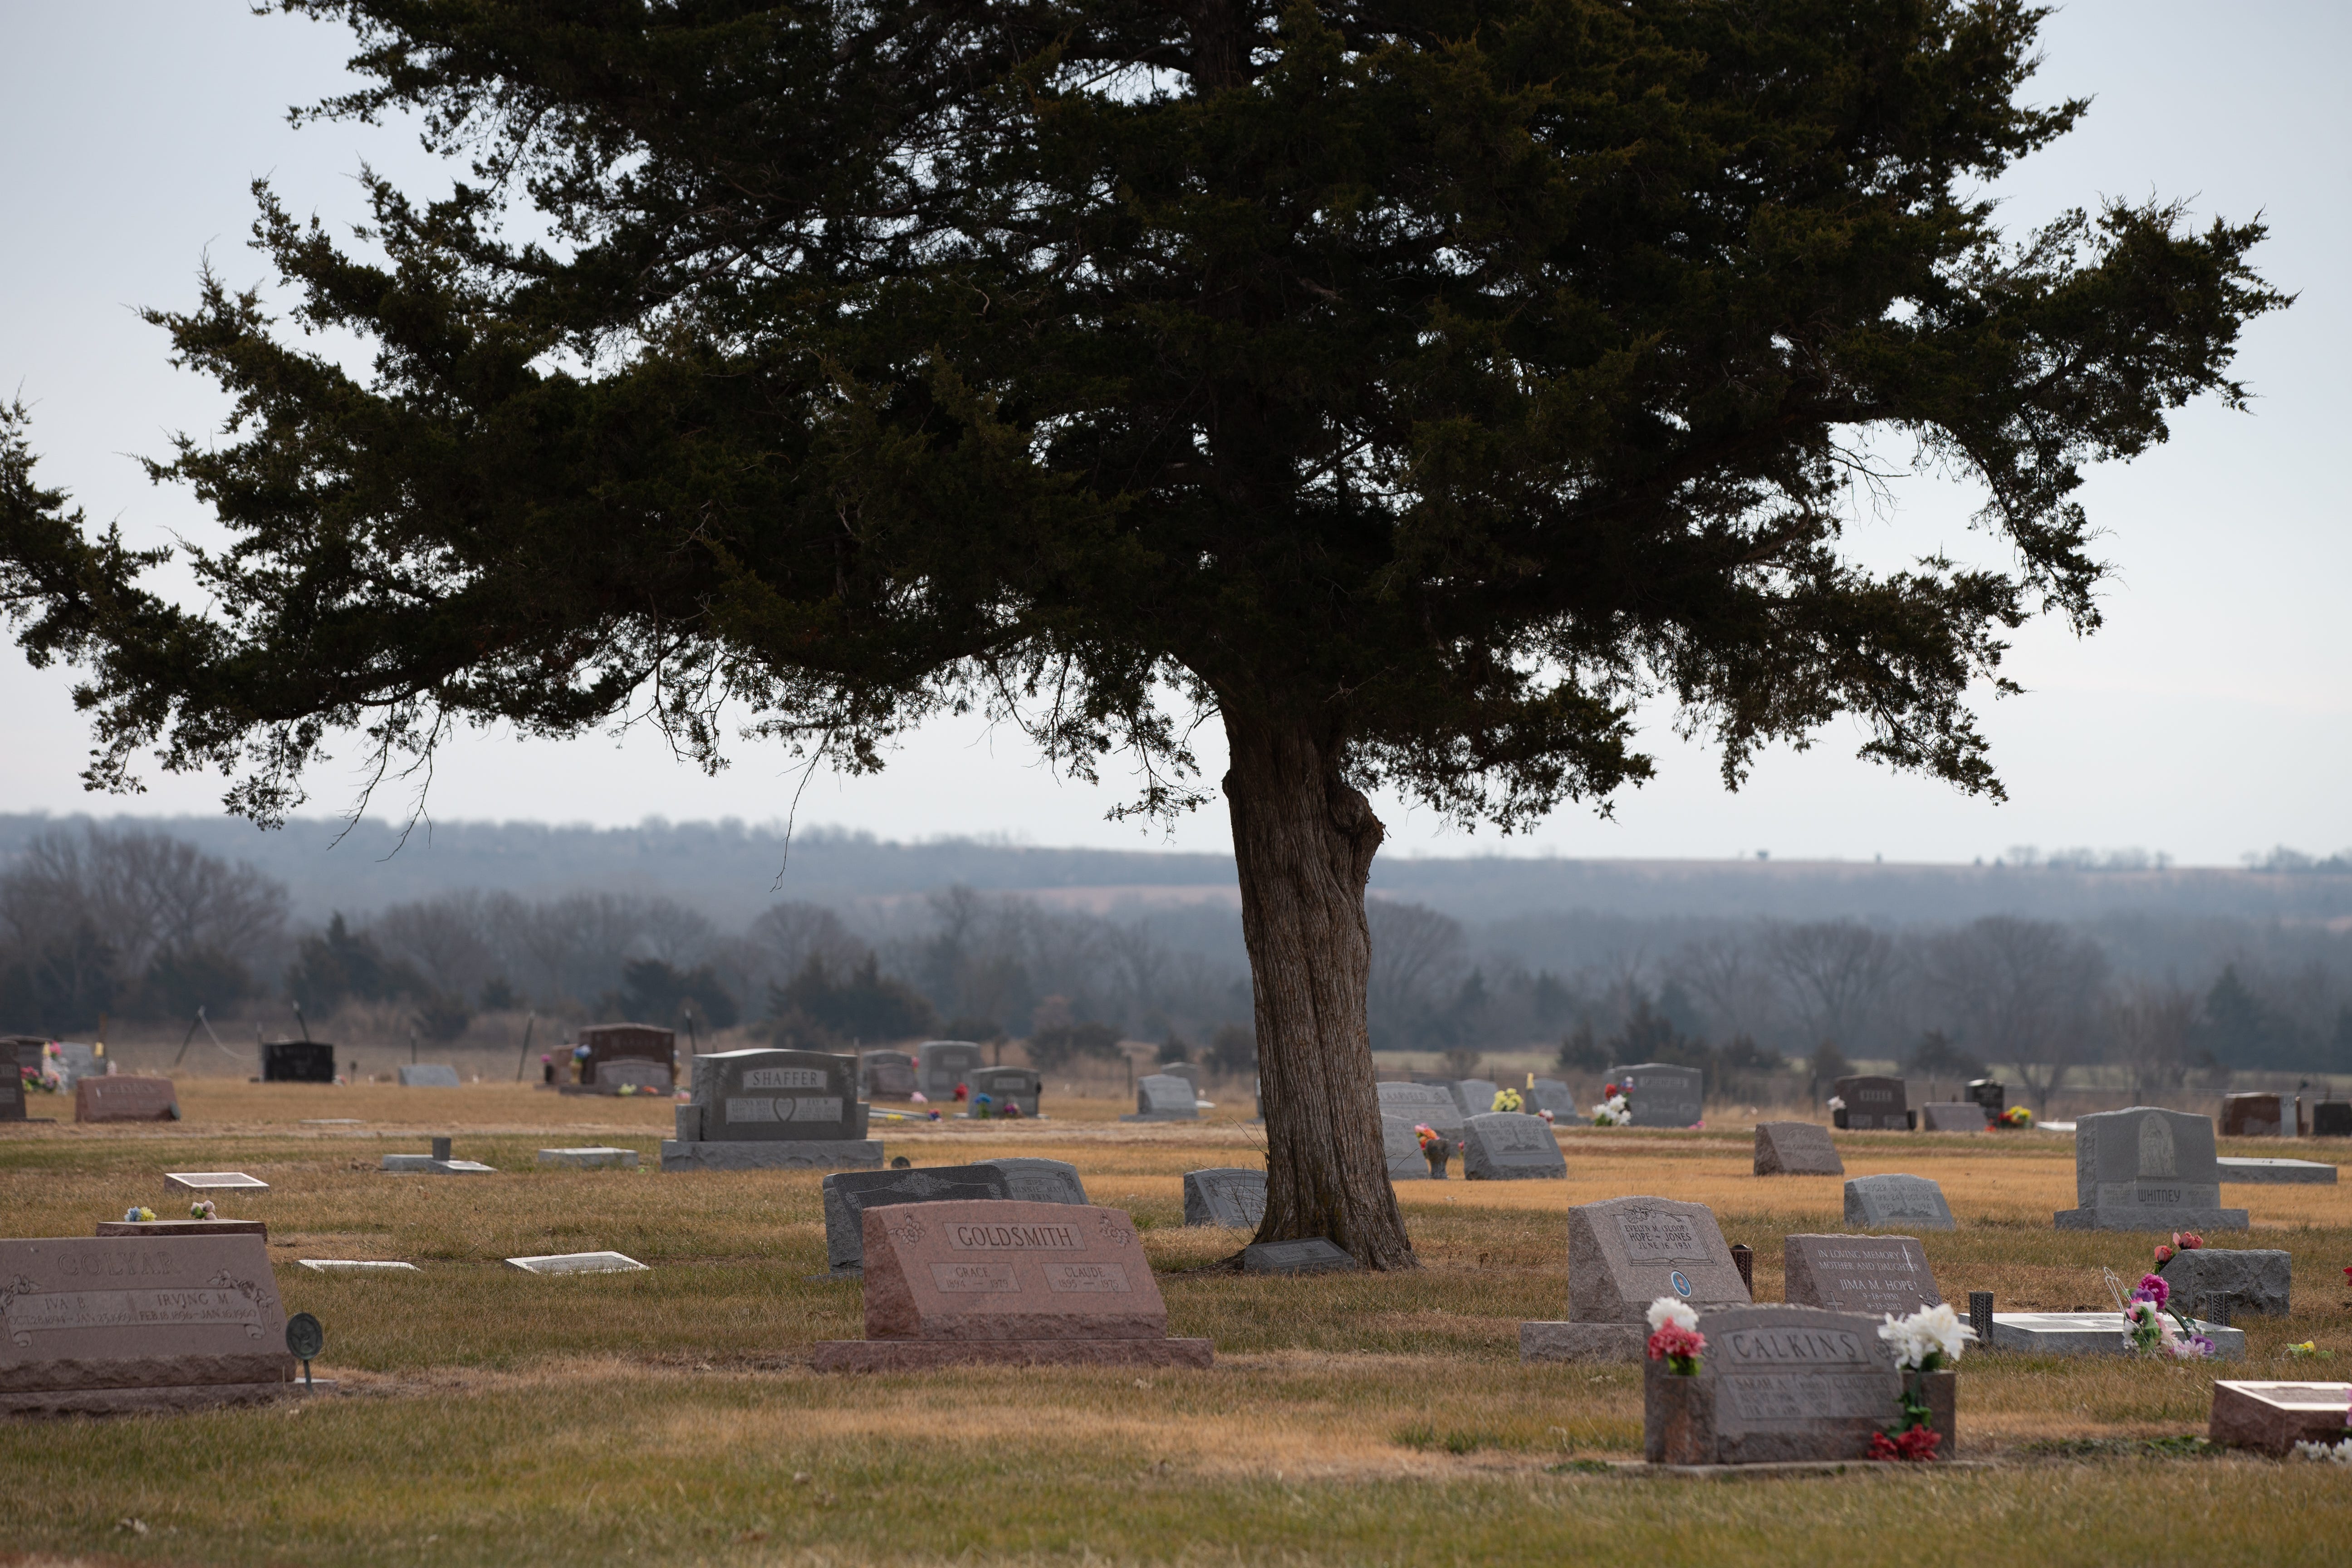 This cemetery at Melvern, where Lisa Montgomery formerly lived, has more than 1,800 gravesites, which is nearly five times the city's population.